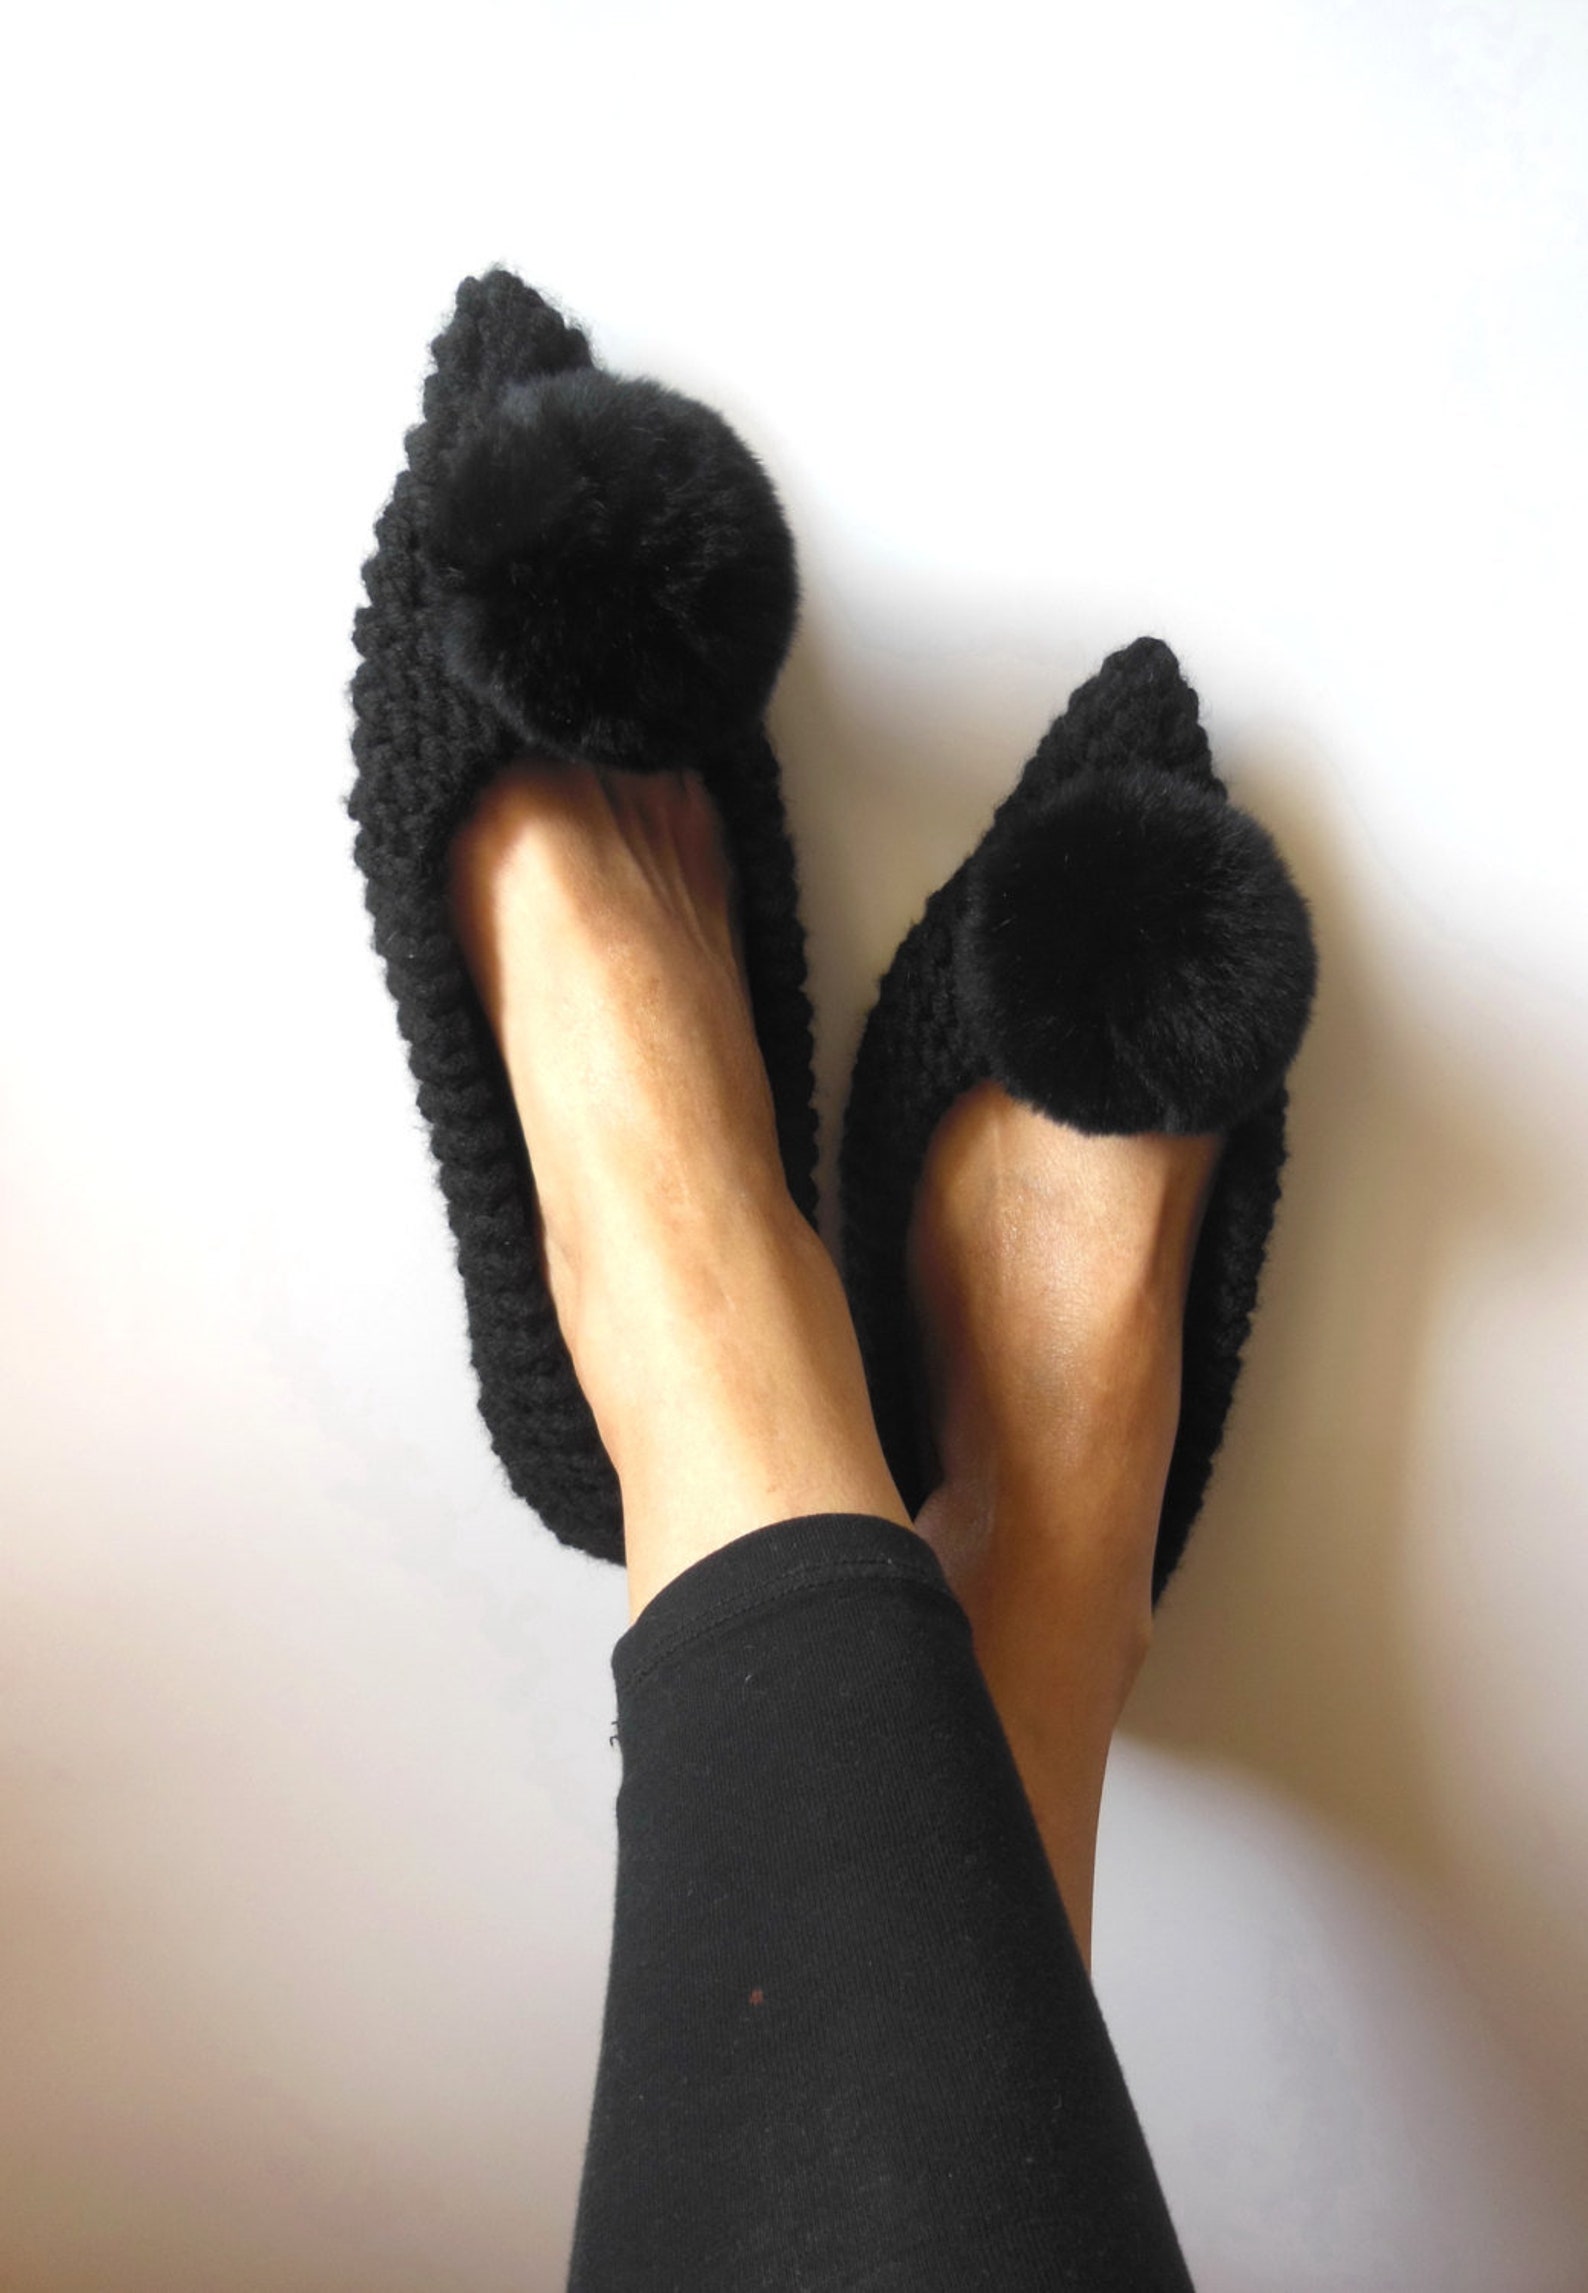 pointed toe flats, real or faux fur pom pom, black wool slippers, witches shoes, non-slip ballet flats, gift wrapping, handmade